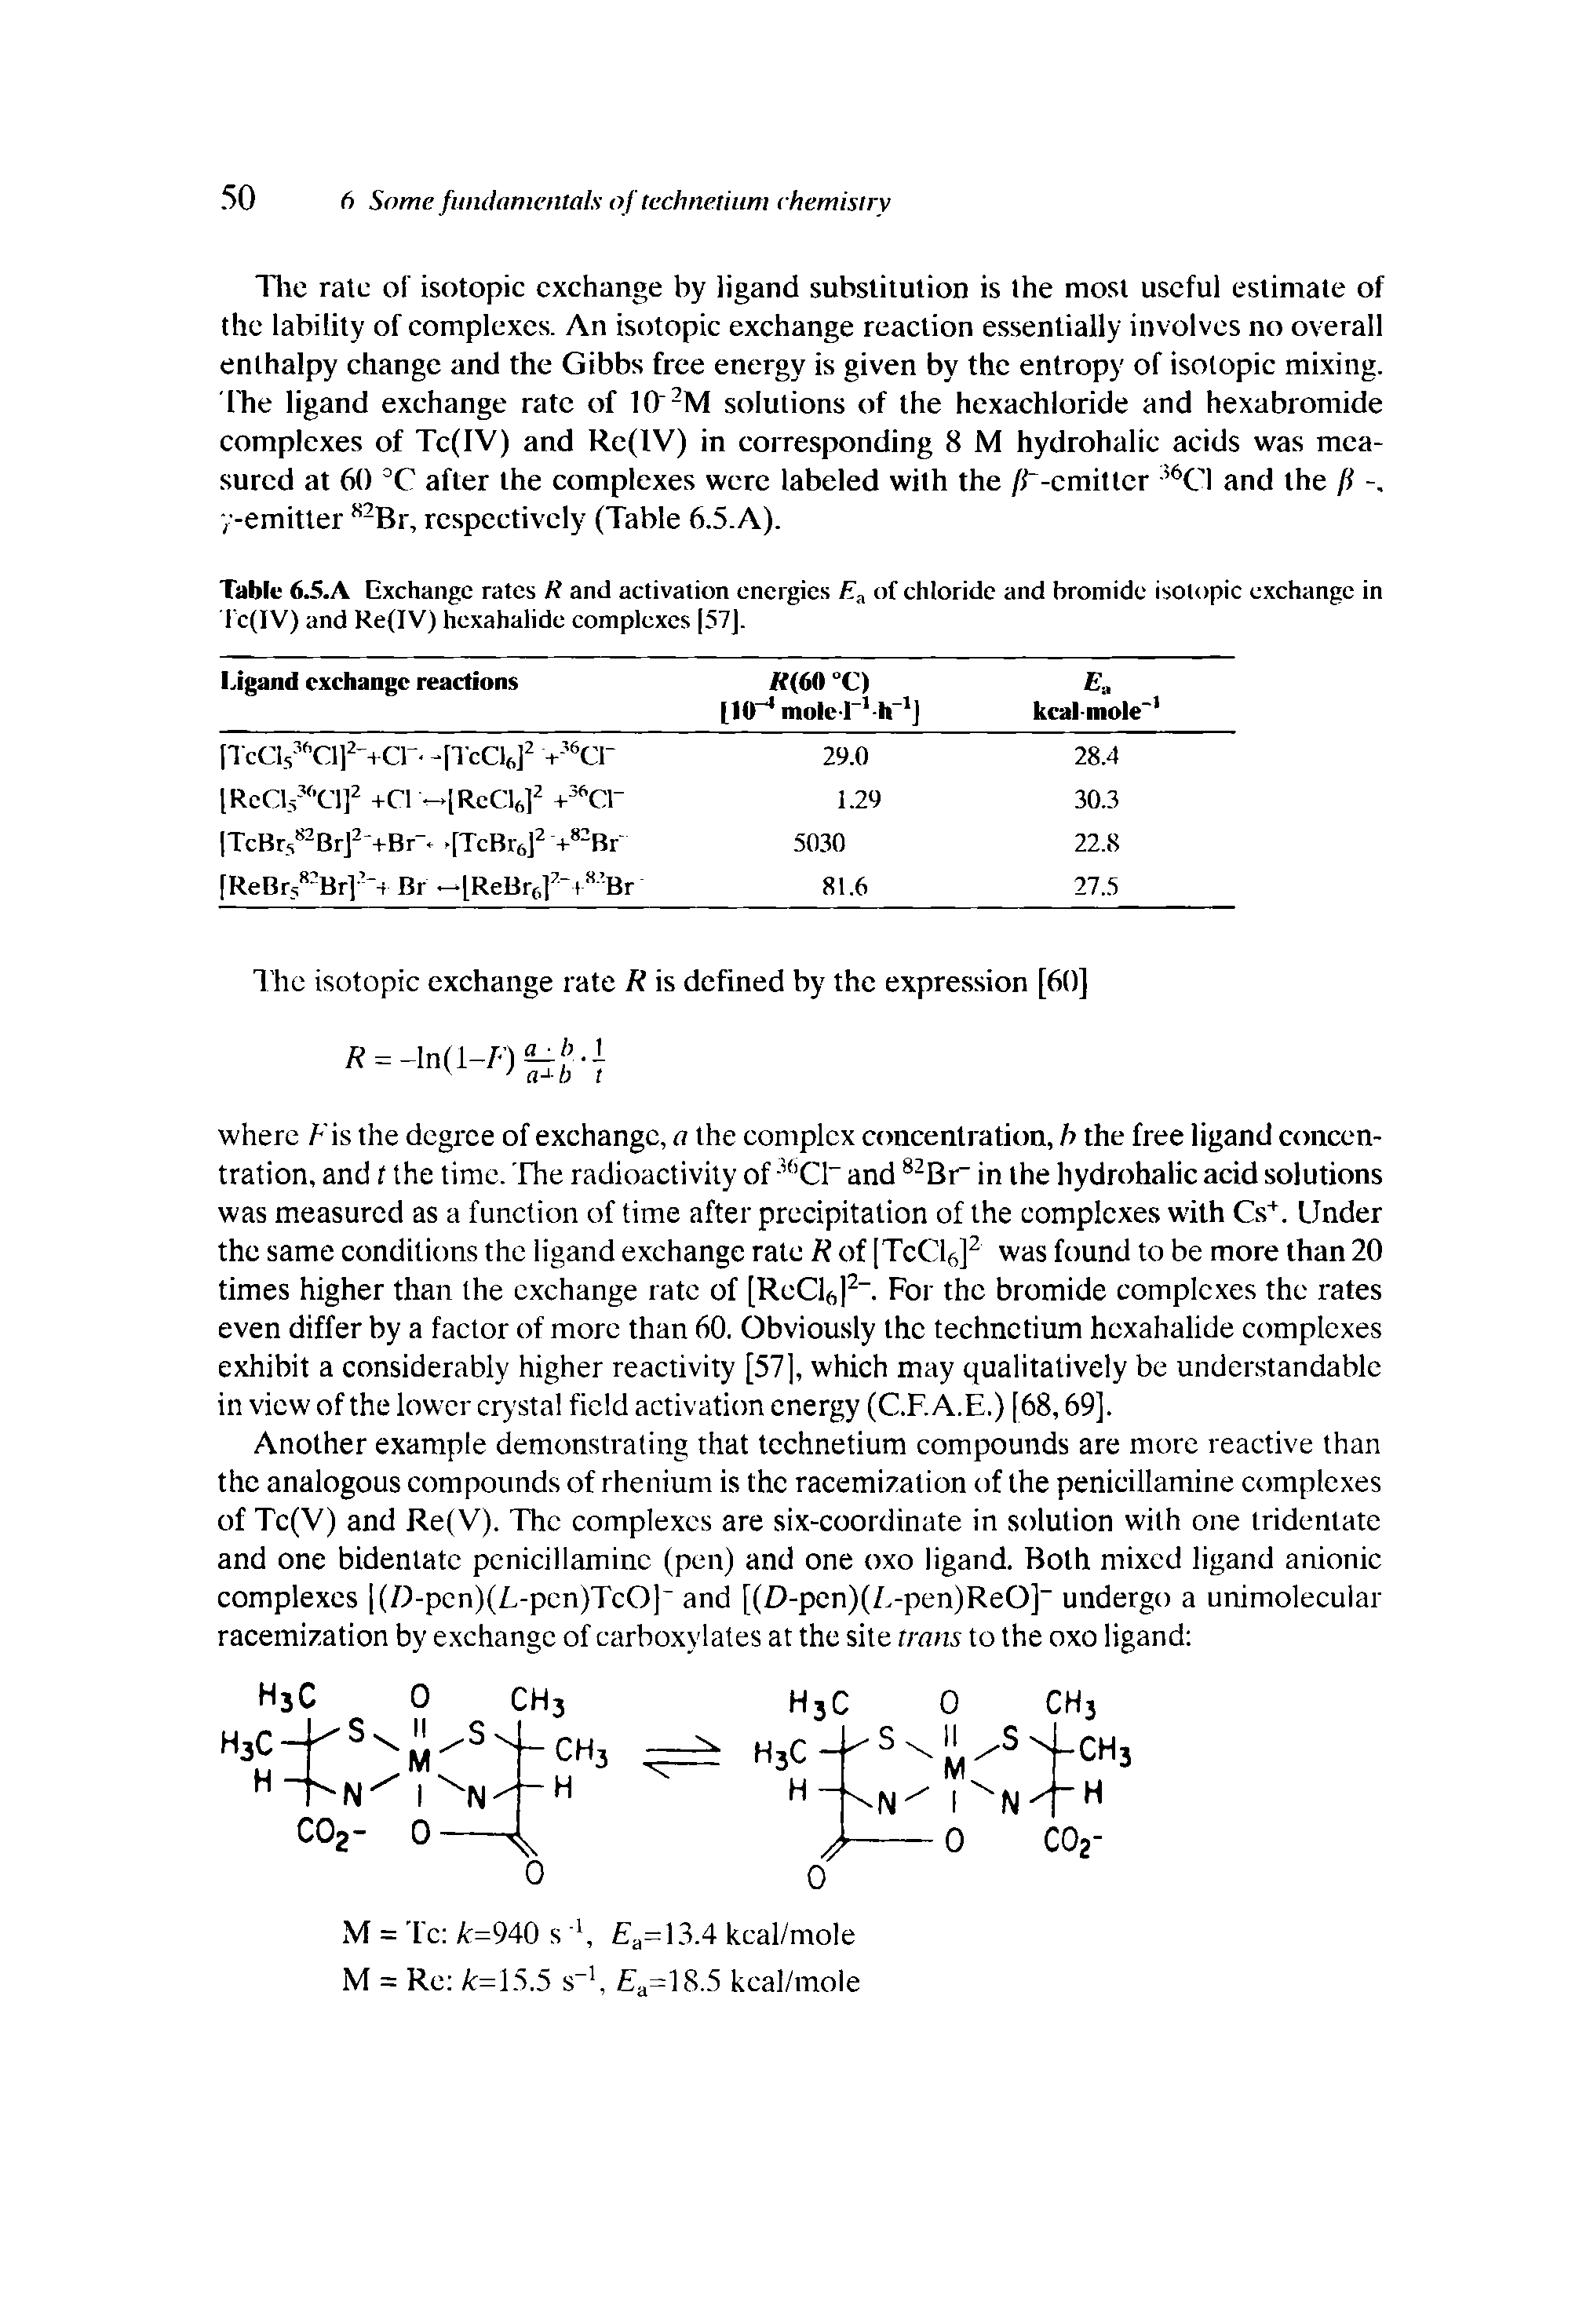 Table 6.S.A Exchange rates K and activation energies of chloride and bromide isotopic e.xchangc in 1 c(IV) and Re(IV) hexahalide complexes 57).